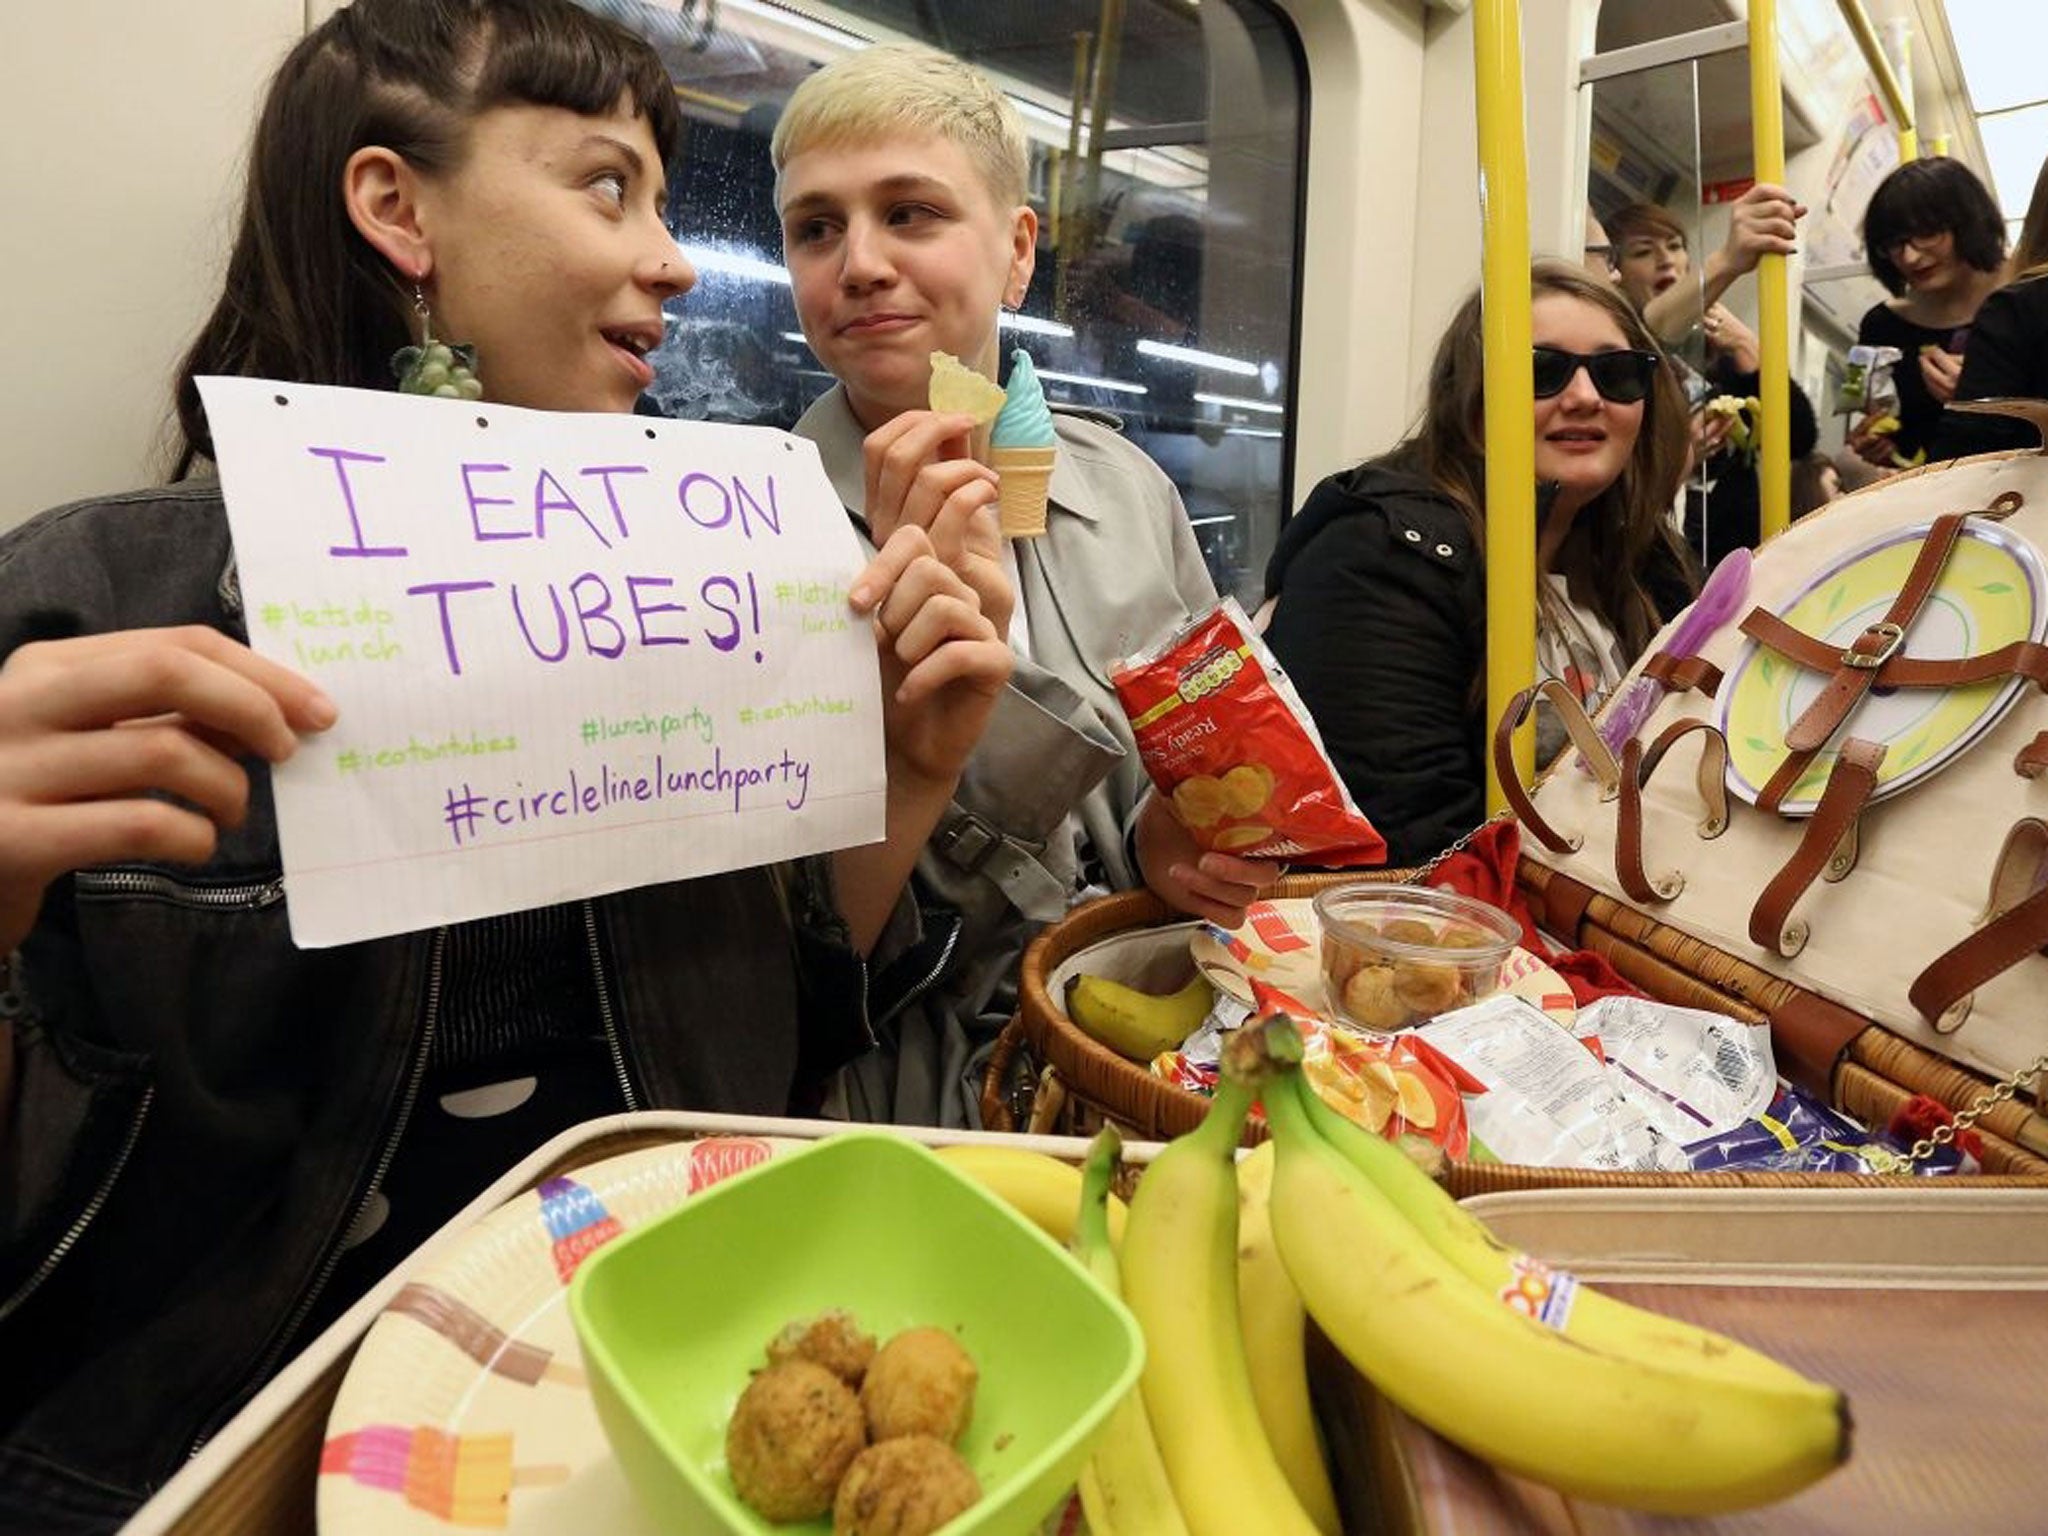 Alexis Calvas (left) and Lucy Brisbane McKay (right), organisers of a 'Lunch Party' on the circle line underground tube in London, 14 April 2014.